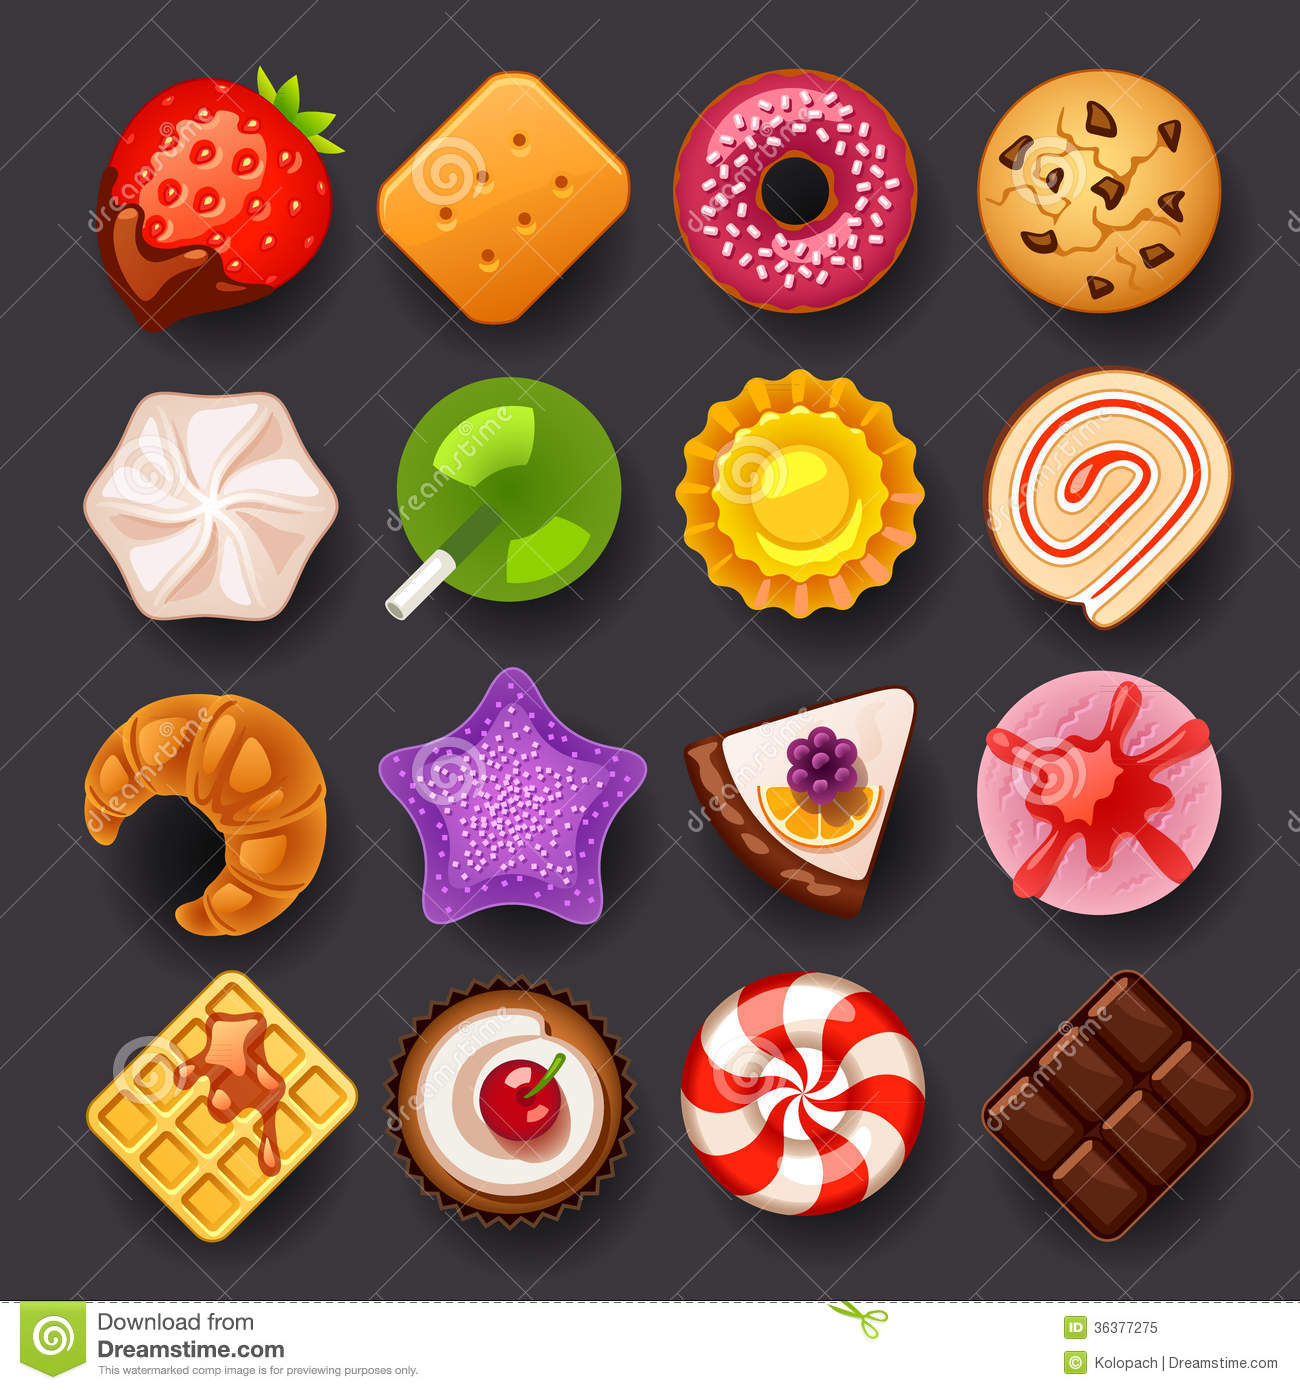 Desserty icons for mac